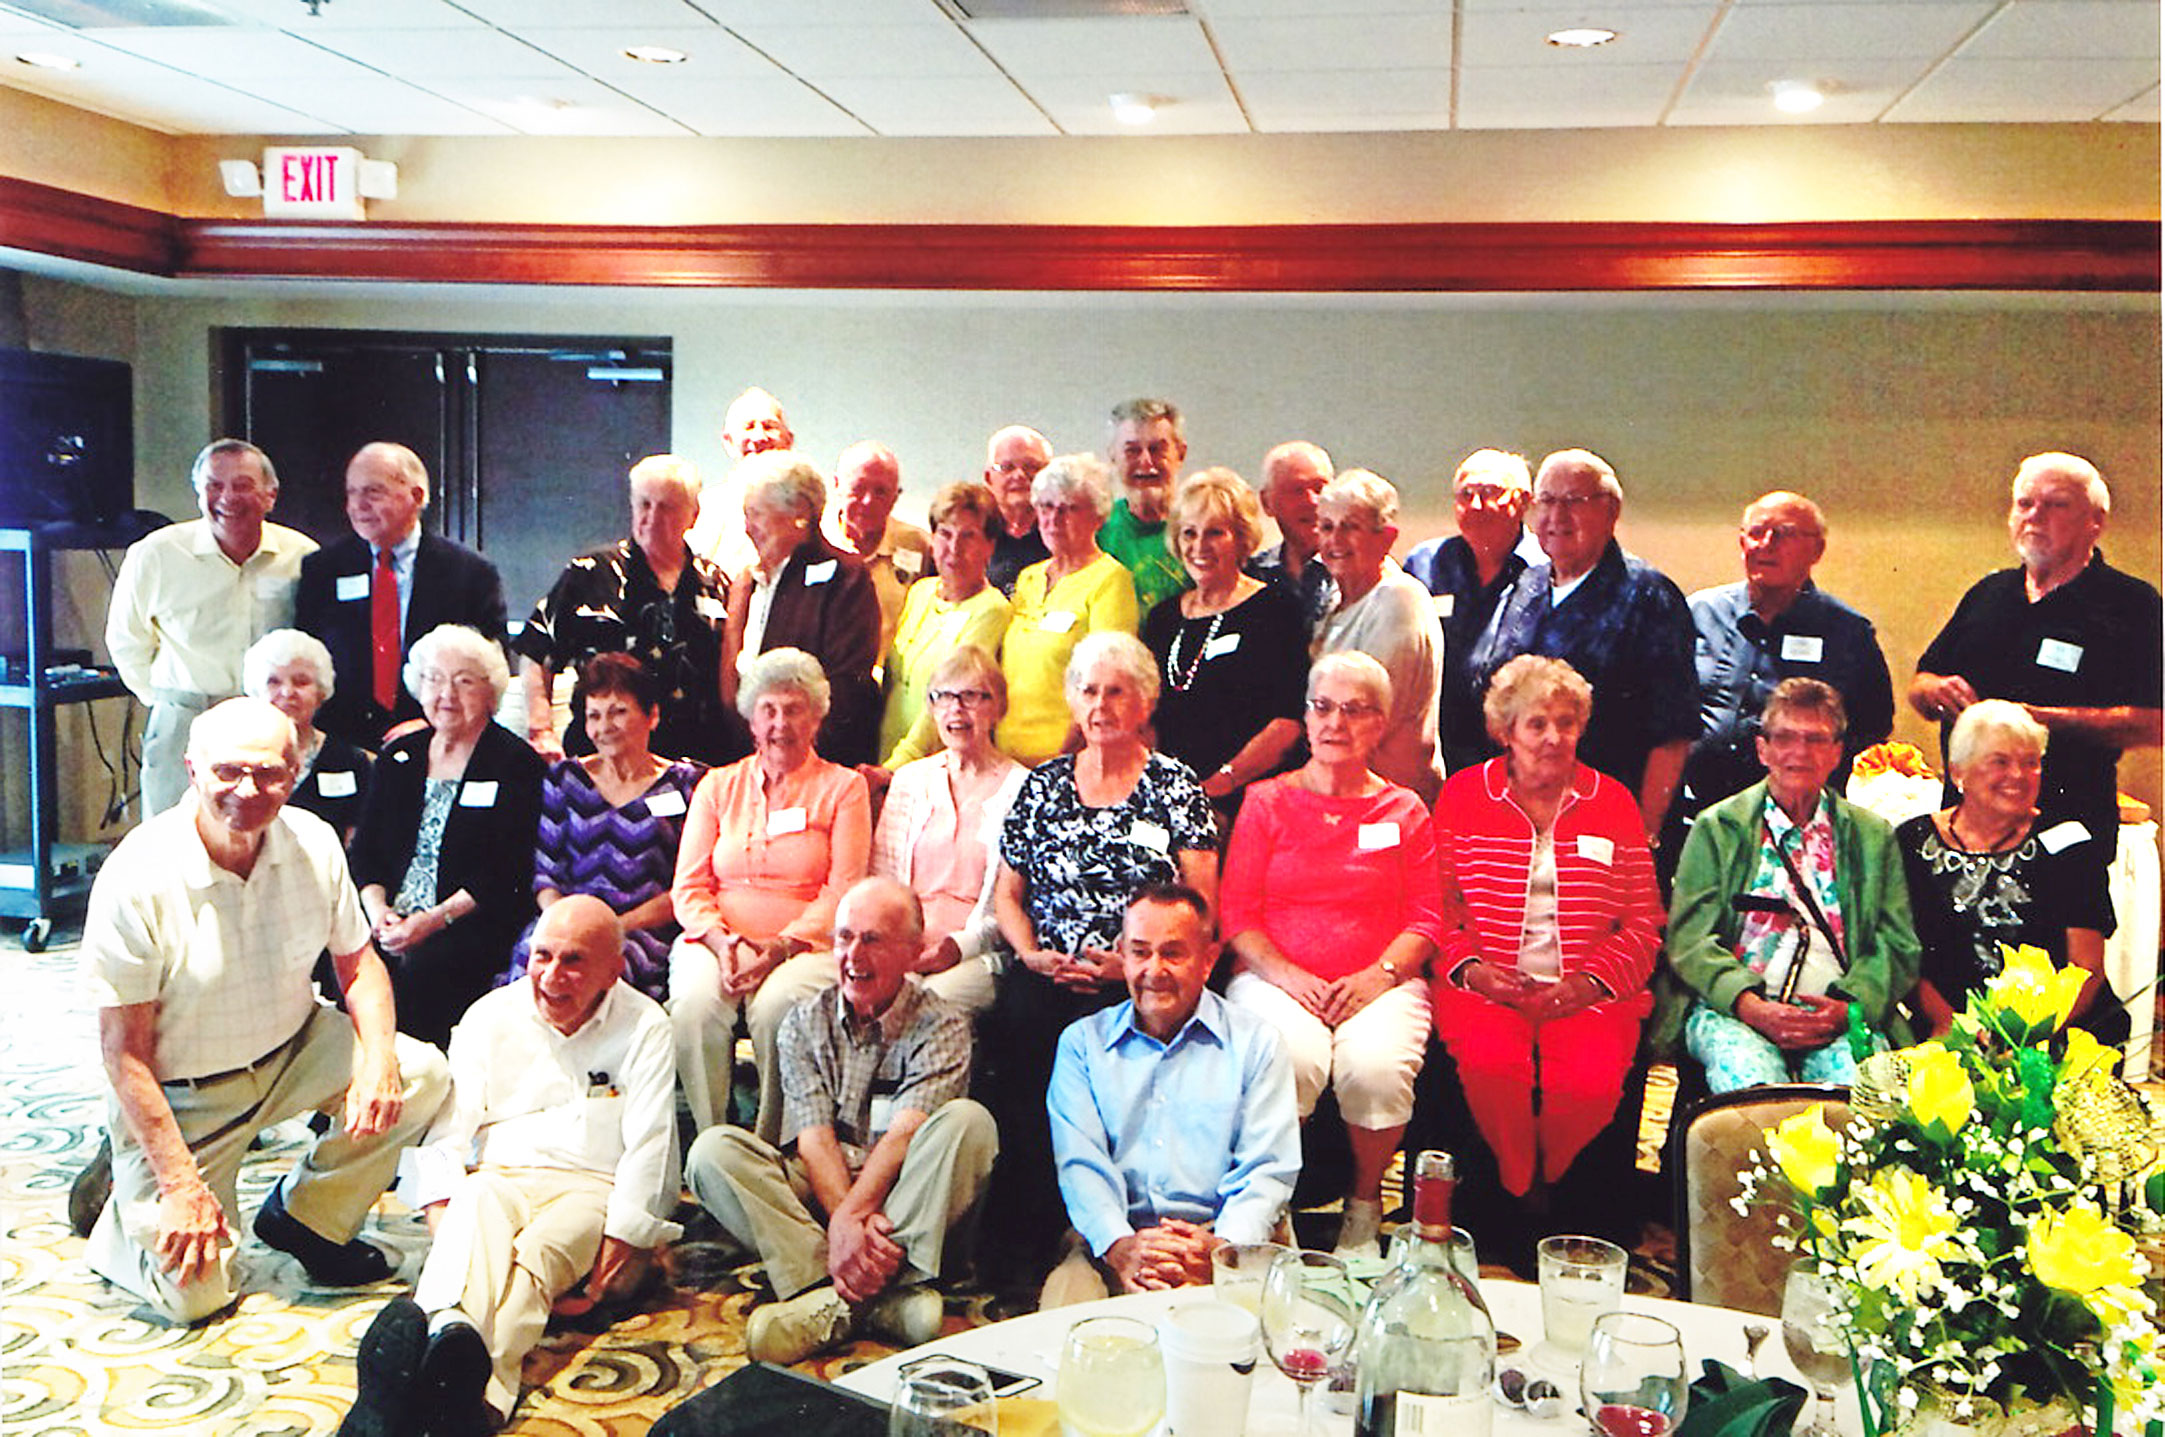 SPECIAL TO THE VINDICATOR
Members of the Ursuline High School Class of 1951 gathered for a 65th class reunion on July 30 at the Hampton Inn in Canfield. Reunion activities for the classmates from July 29 through 31 included a pizza party at Inner Circle in Canfield; a brunch at Bob Evans Restaurant in Canfield; a Mass dedicated to the class at the high school, officiated by the Rev. Richard Murphy, and a video presentation; and a cocktail hour and dinner. Classmates, from left, are kneeling, Tom Klempay; seated on floor, Tom Nakley, Al Lyster and Tom Popovich; second row, Jean Kling Baun, Carroll Dixon Necko, Mary Virginia Cleary Baynes, Theresa Conrecode Nichols, Joyce McGinty Petrunia, Blanche Stratford Lanterman, Sally Kenny Dailey, Mary Lou McGovern Beck, Joann Fitzpatrick Reilley and Millie Charnoki Campean; third row, Ron Galip, Jack Nichols, Guy Schiavone, Patty Eddy, Marian McCarthy Baker, Sally Mullen McGrath, Jacquelyn Trampush Trgovac, Claranne Lyden McCloud, Frank Beck, John Demain and Bill Dochery; and fourth row, John Wanchow, Bob Barrett, John Zamary, Tom Flynn, Joe Ziemianski and Bernie Wilkens. 
